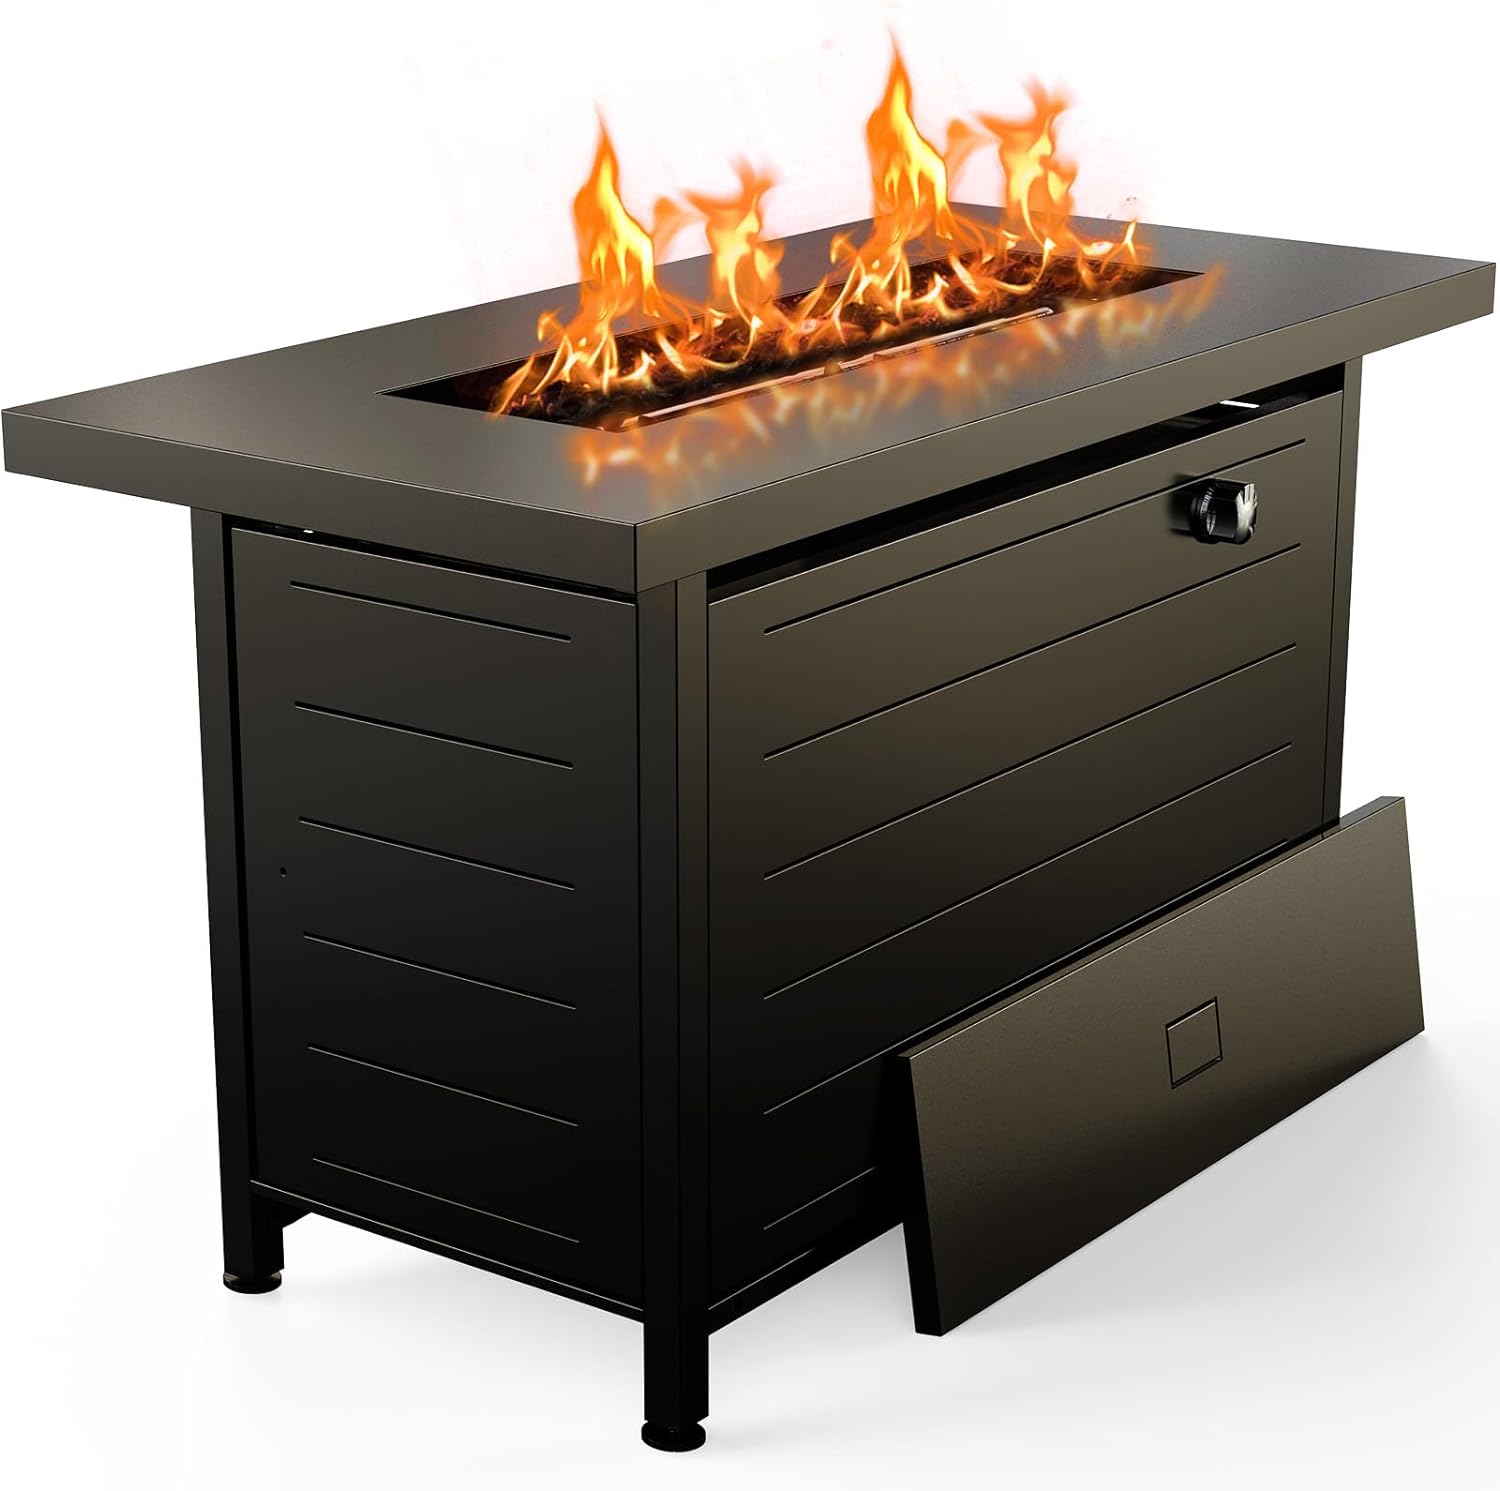 Ciays 42 Inch Gas Fire Pit Table Review